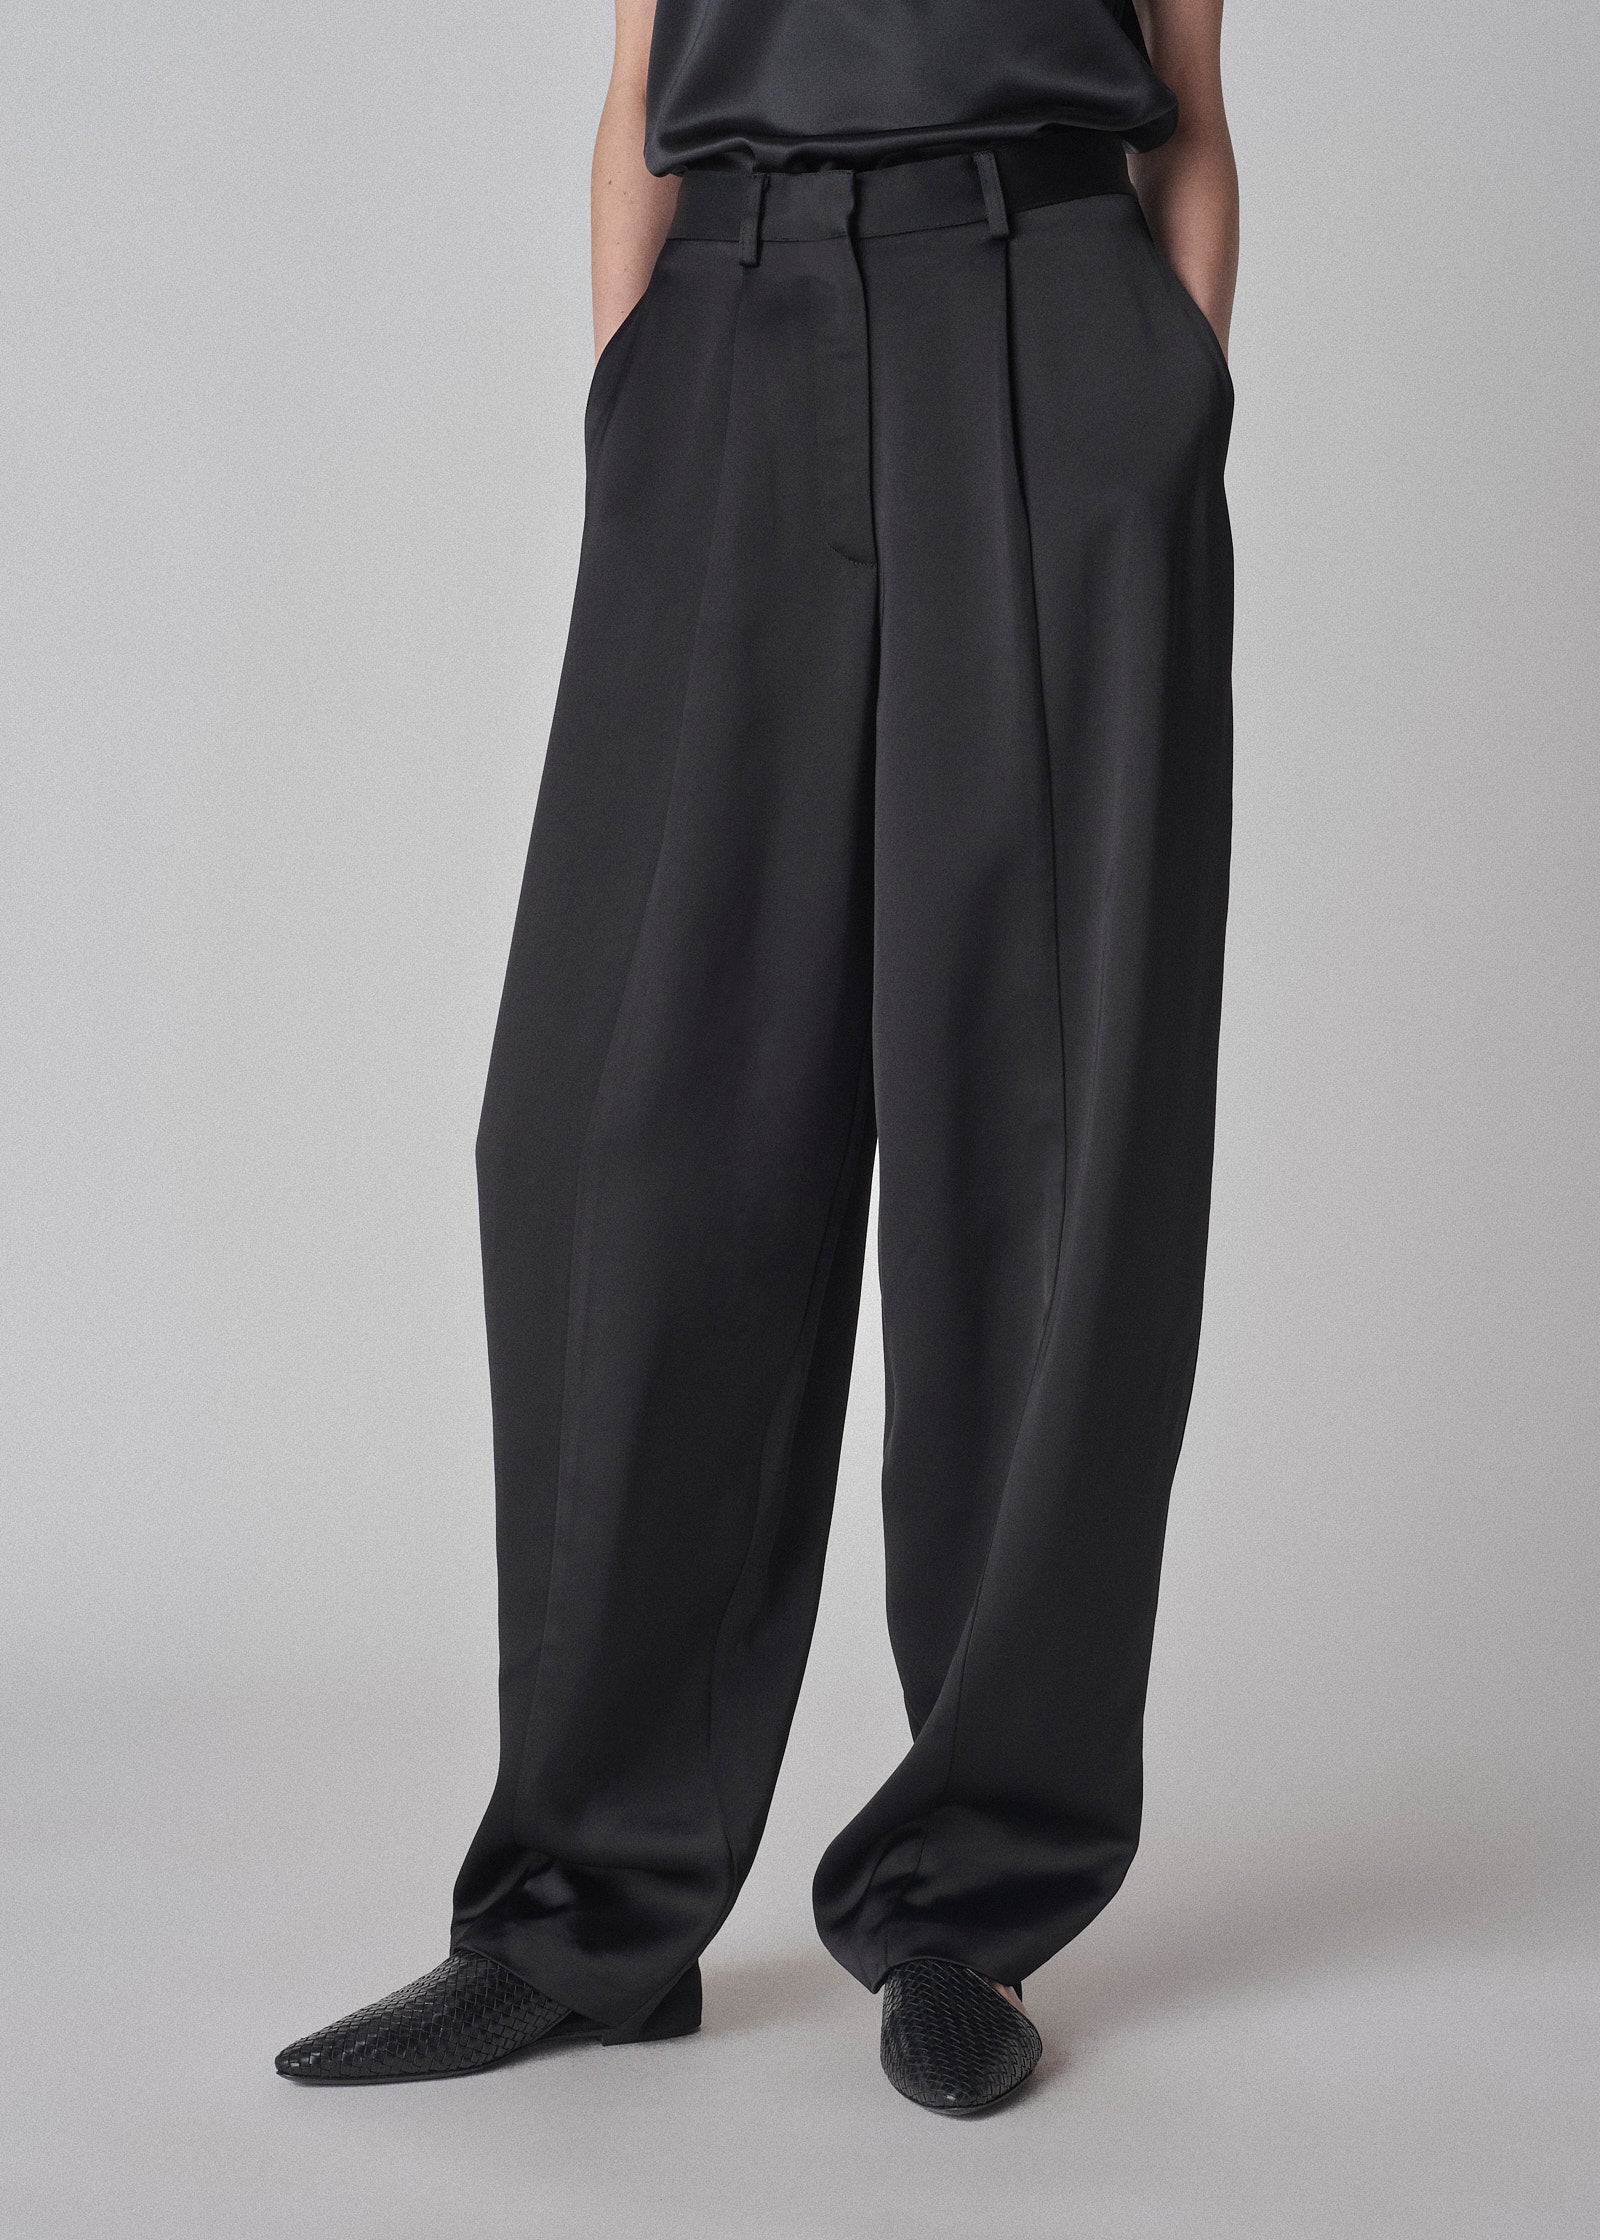 Egg Pant in Satin Crepe - Black - CO Collections